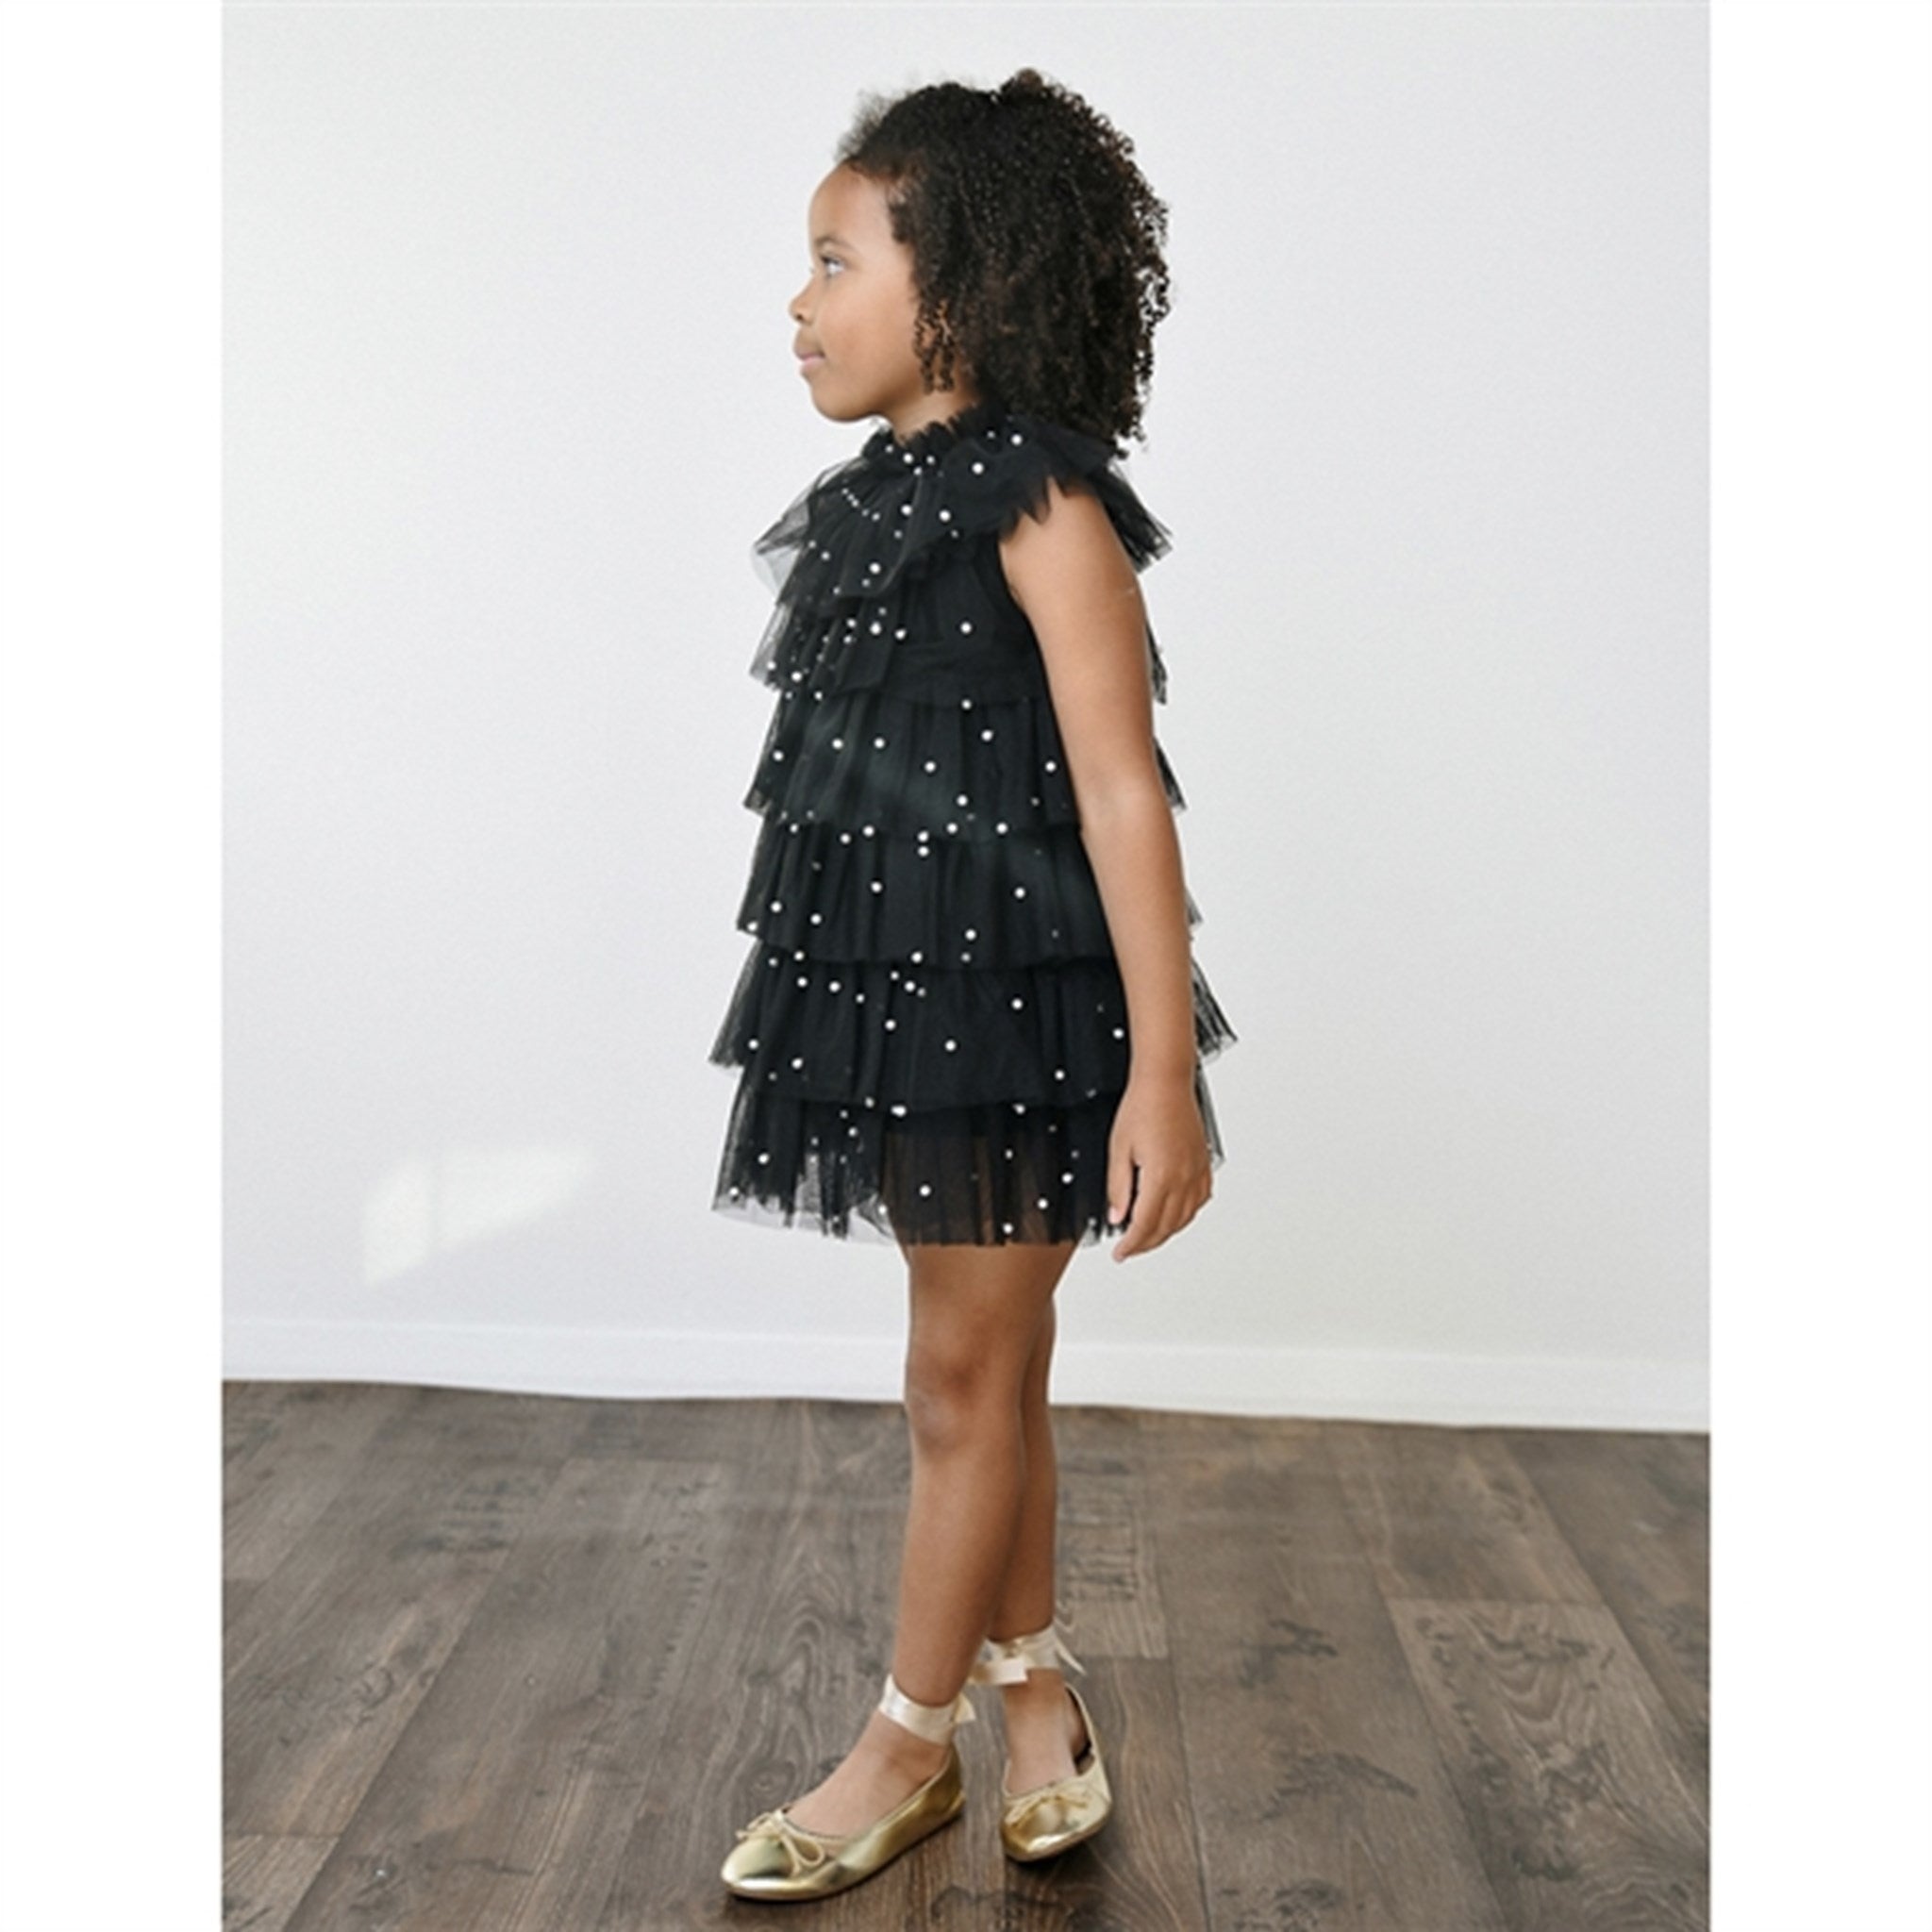 Dolly by Le Petit Tom Pearl Tutully Tiered Tulle Tuttu Dress Black 4